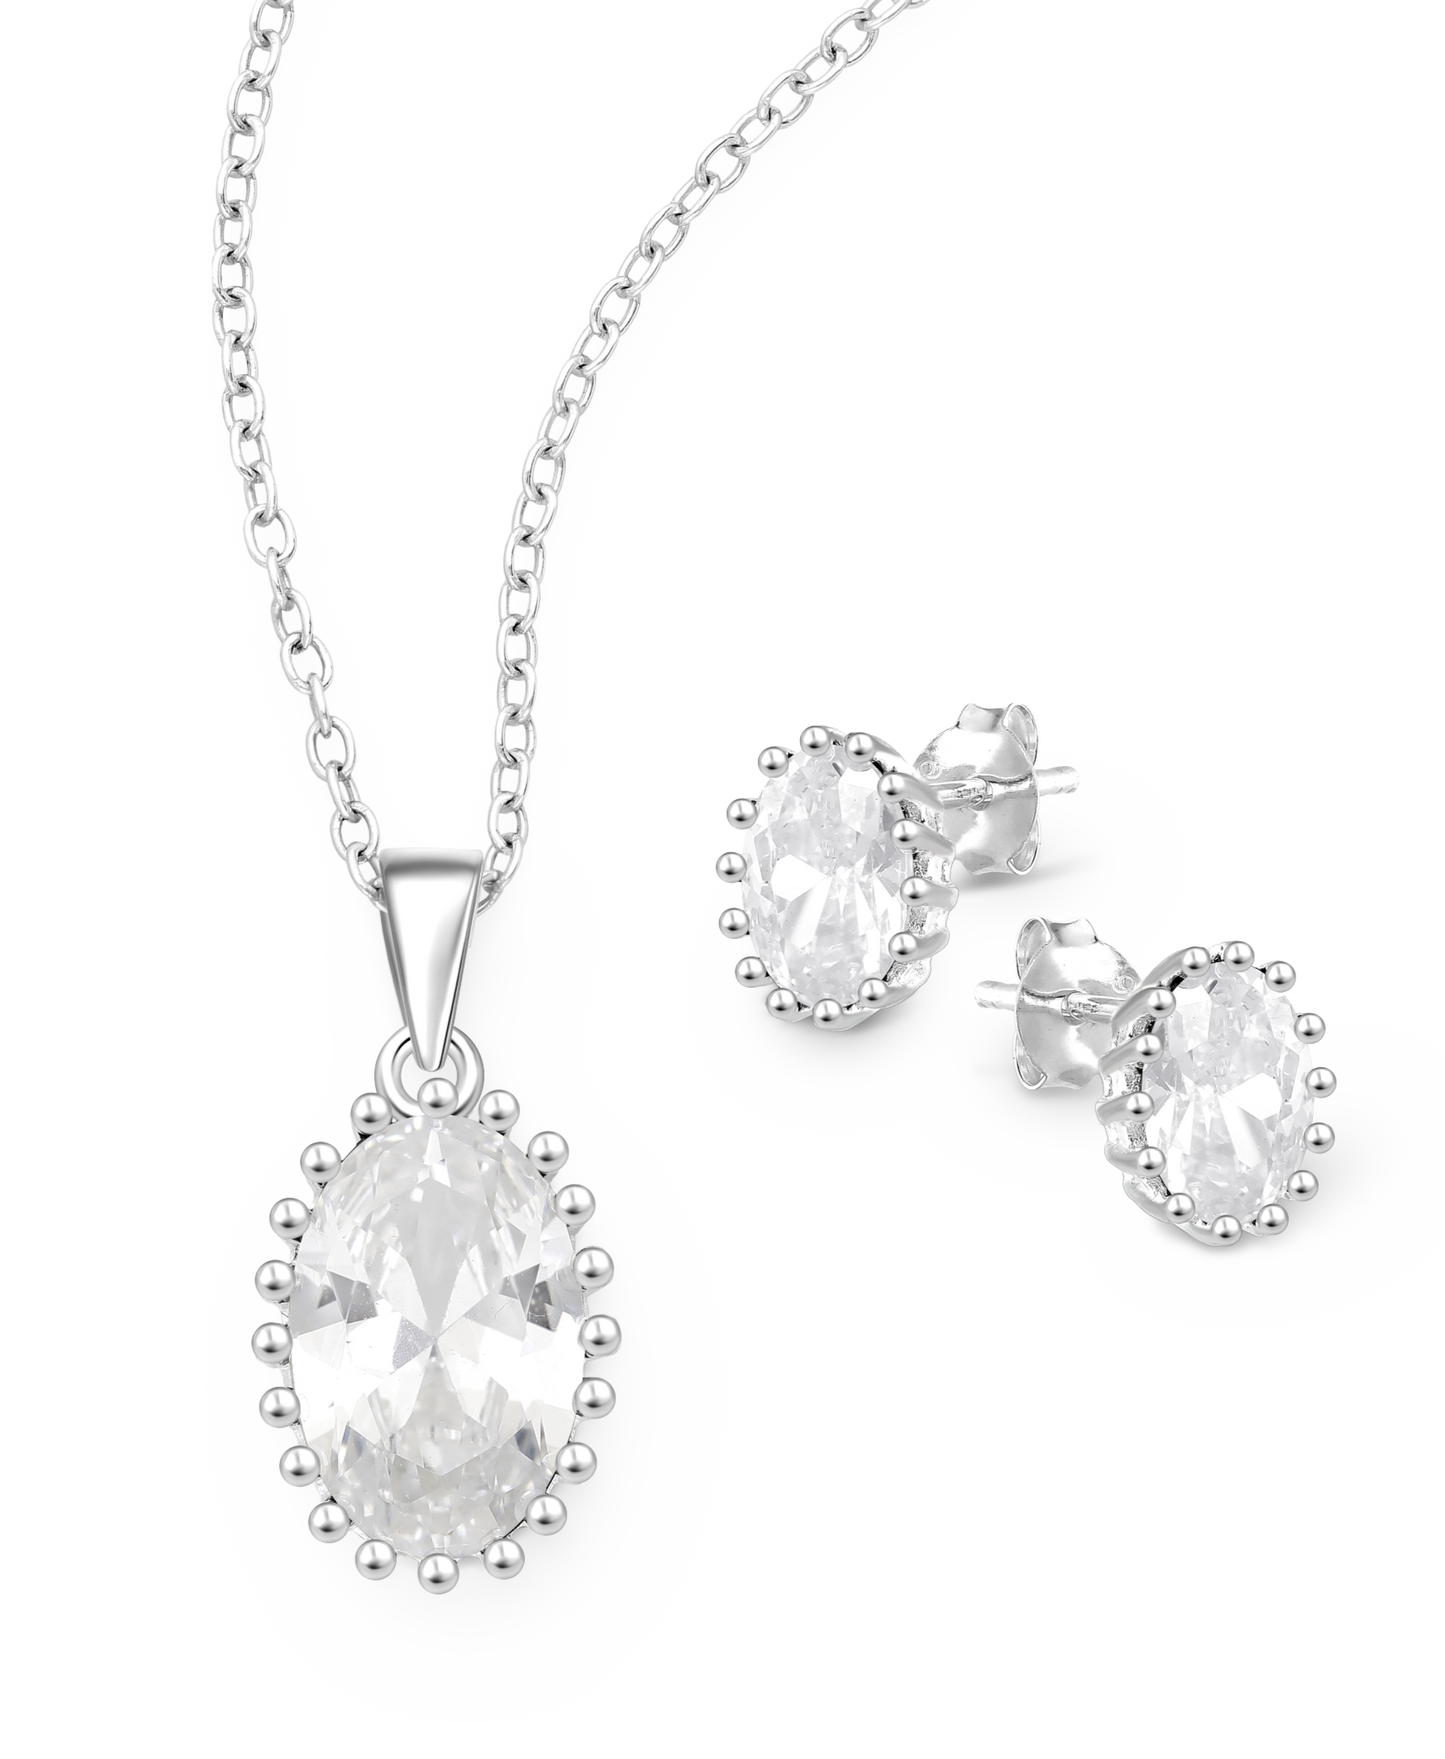 Sterling Silver Push-Back Earrings and Pendant with CZ Simulated Diamonds